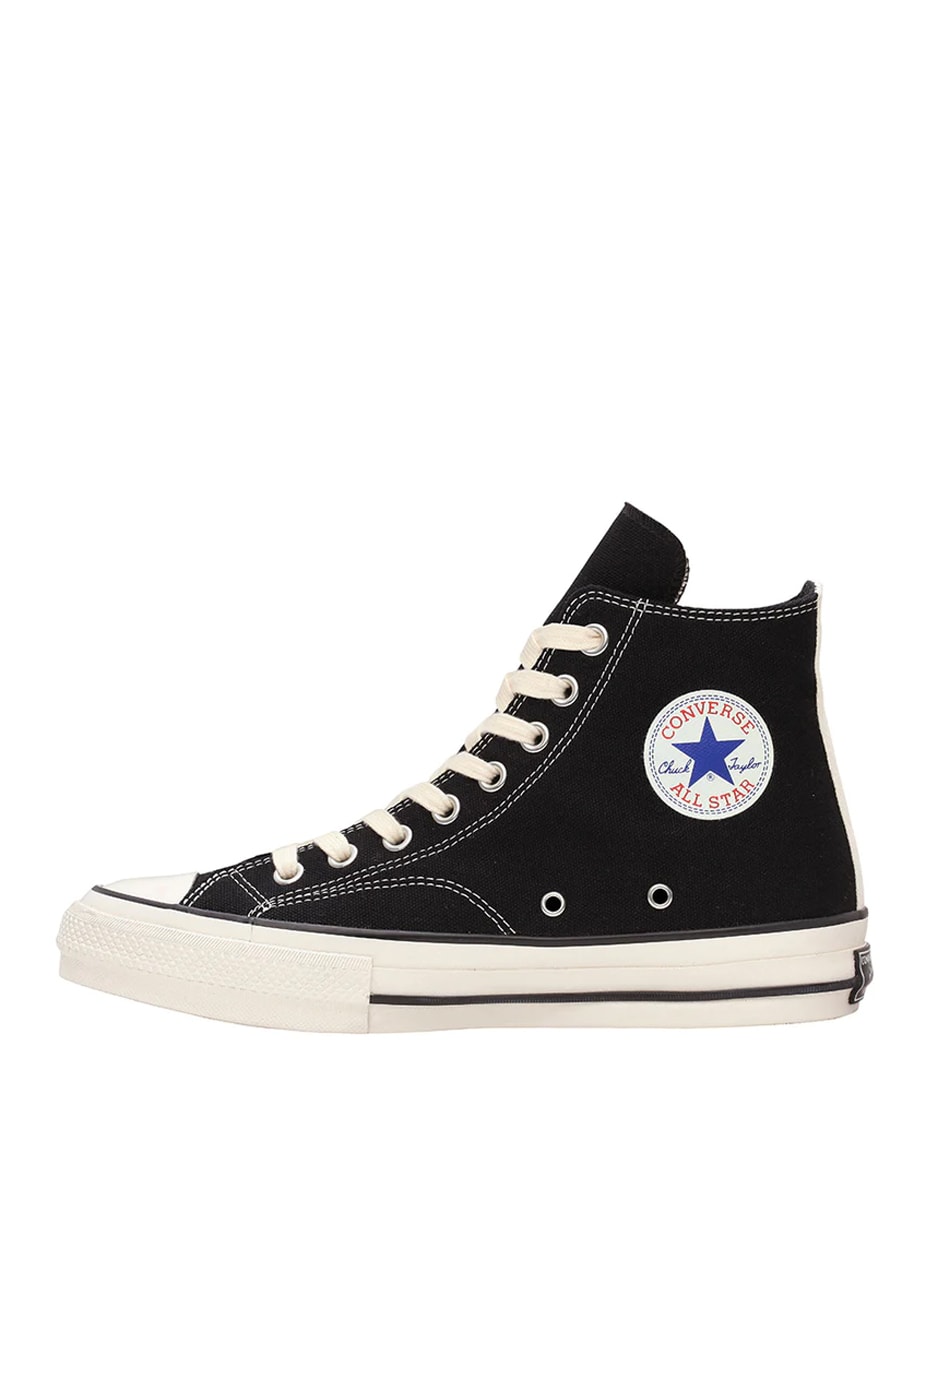 converse japan chuck taylor clothing collection blazer trench coat shoes tees trouser release date info store list buying guide photos price 